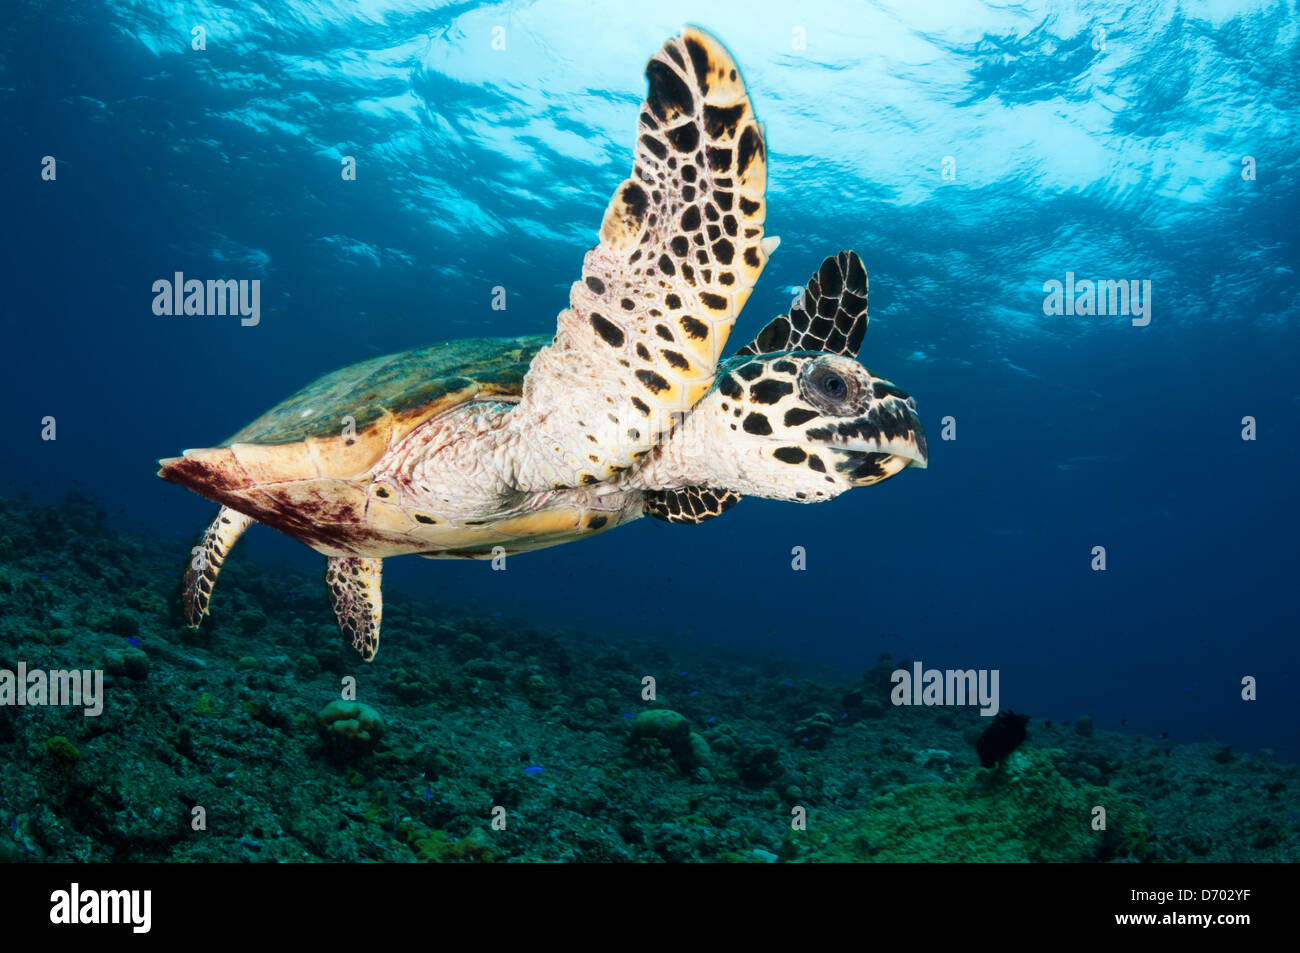 A critically endangered hawksbill turtle swims over the reef Stock Photo